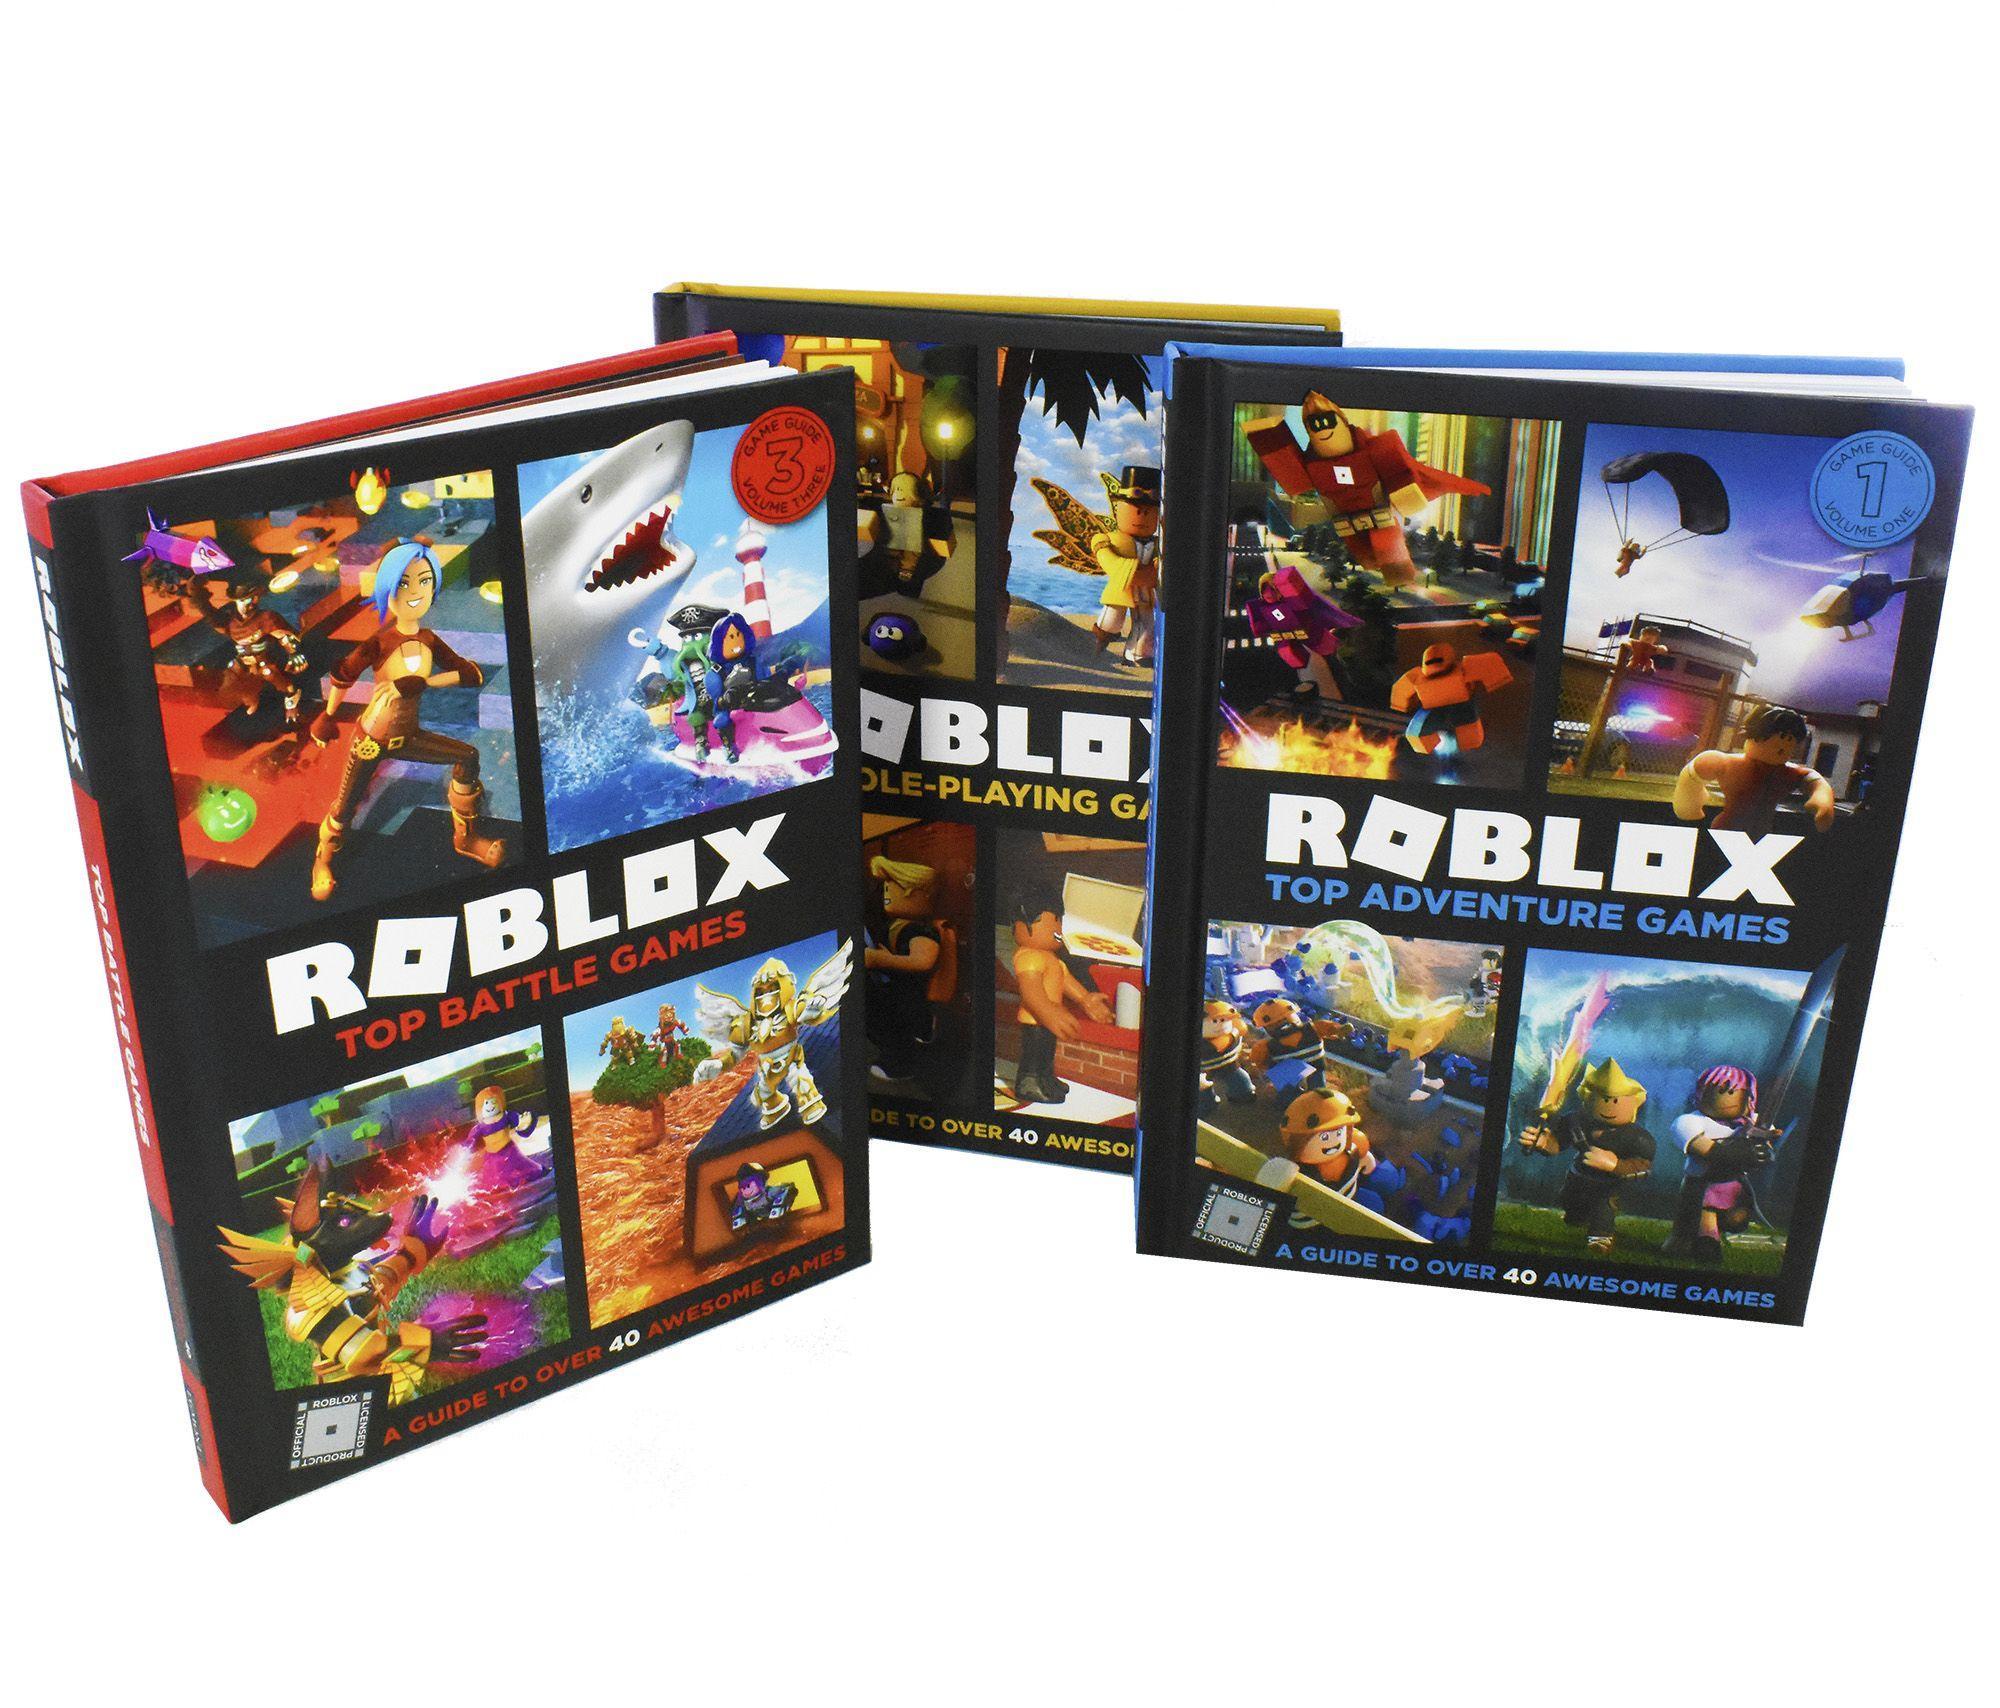 Roblox Ultimate Guide 3 Books Children Collection Hardback By David Jagneaux St Stephens Books - roblox tycoon roblox kids rugs film music books